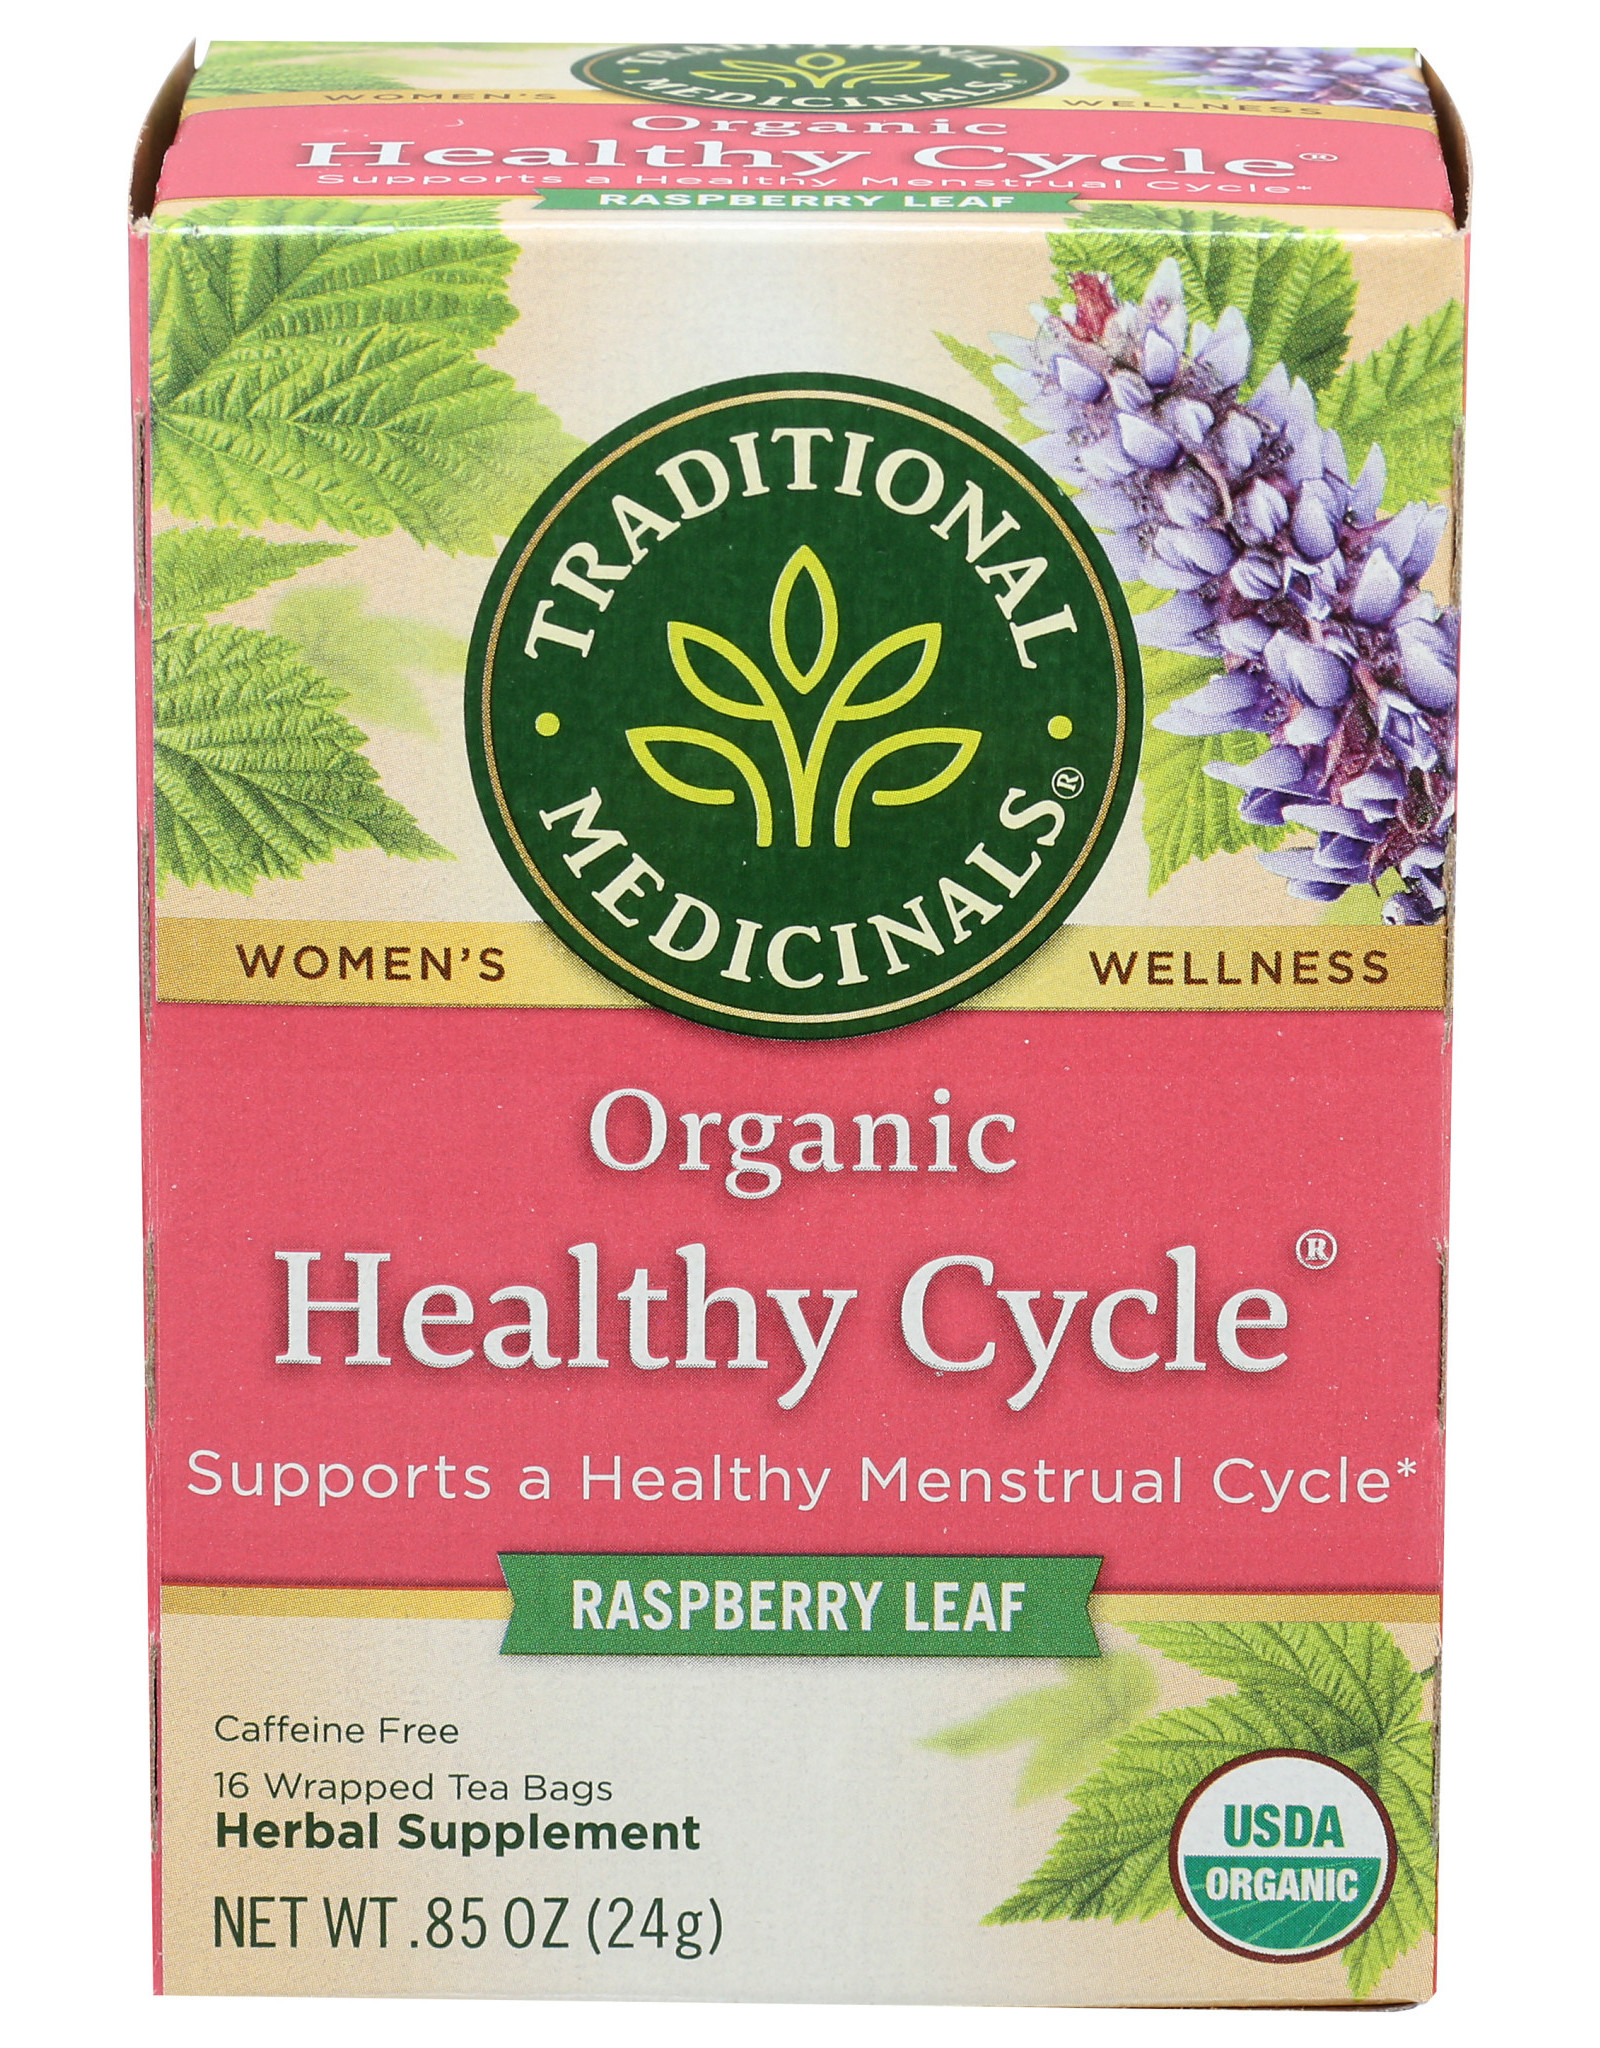 TRADITIONAL MEDICINALS X Traditional Medicinals Healthy Cycle w/ Raspberry Leaf